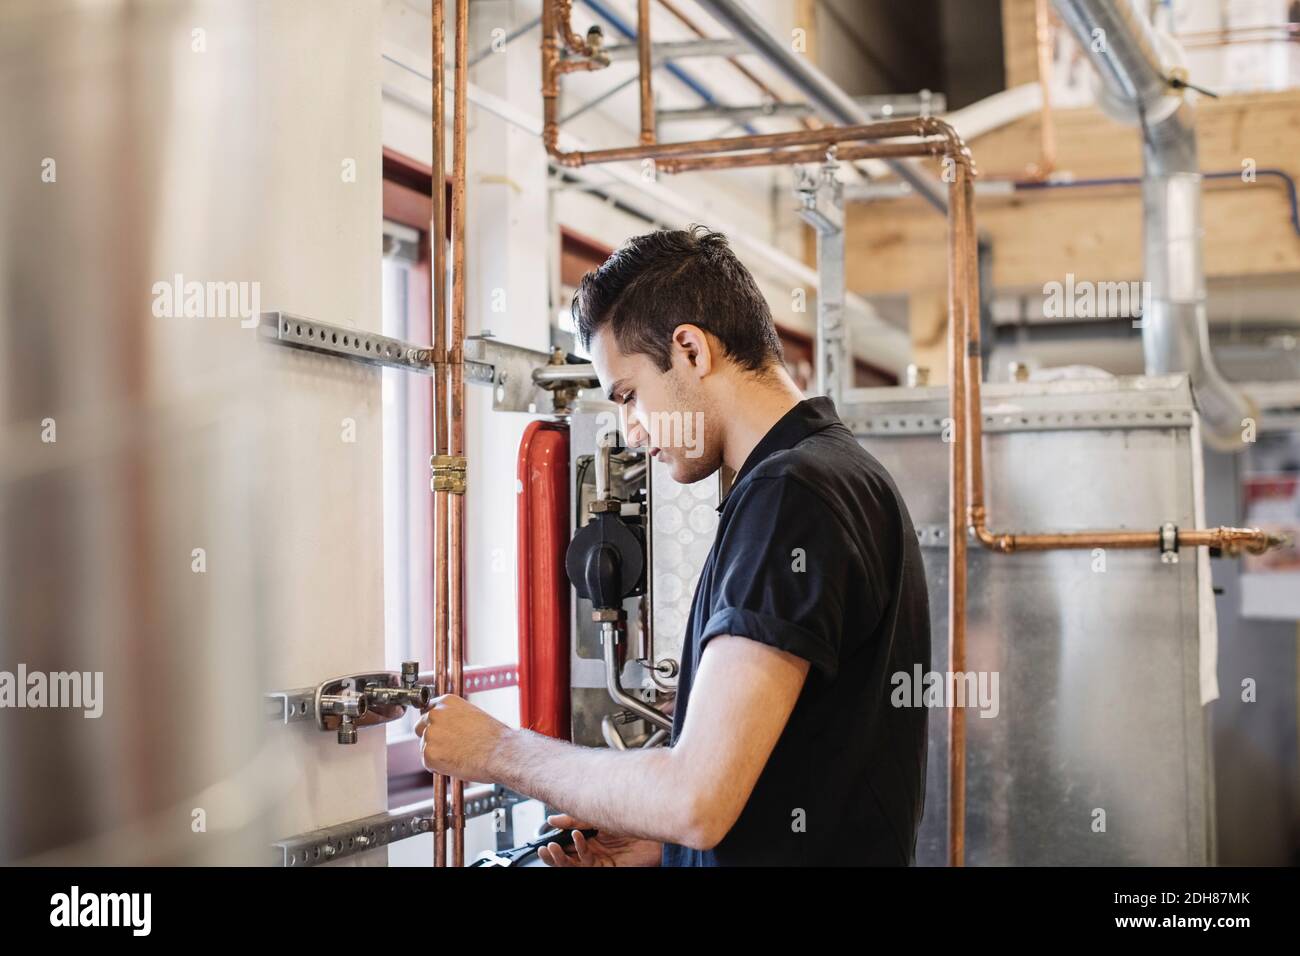 Side view of auto mechanic student analyzing machinery in workshop Stock Photo